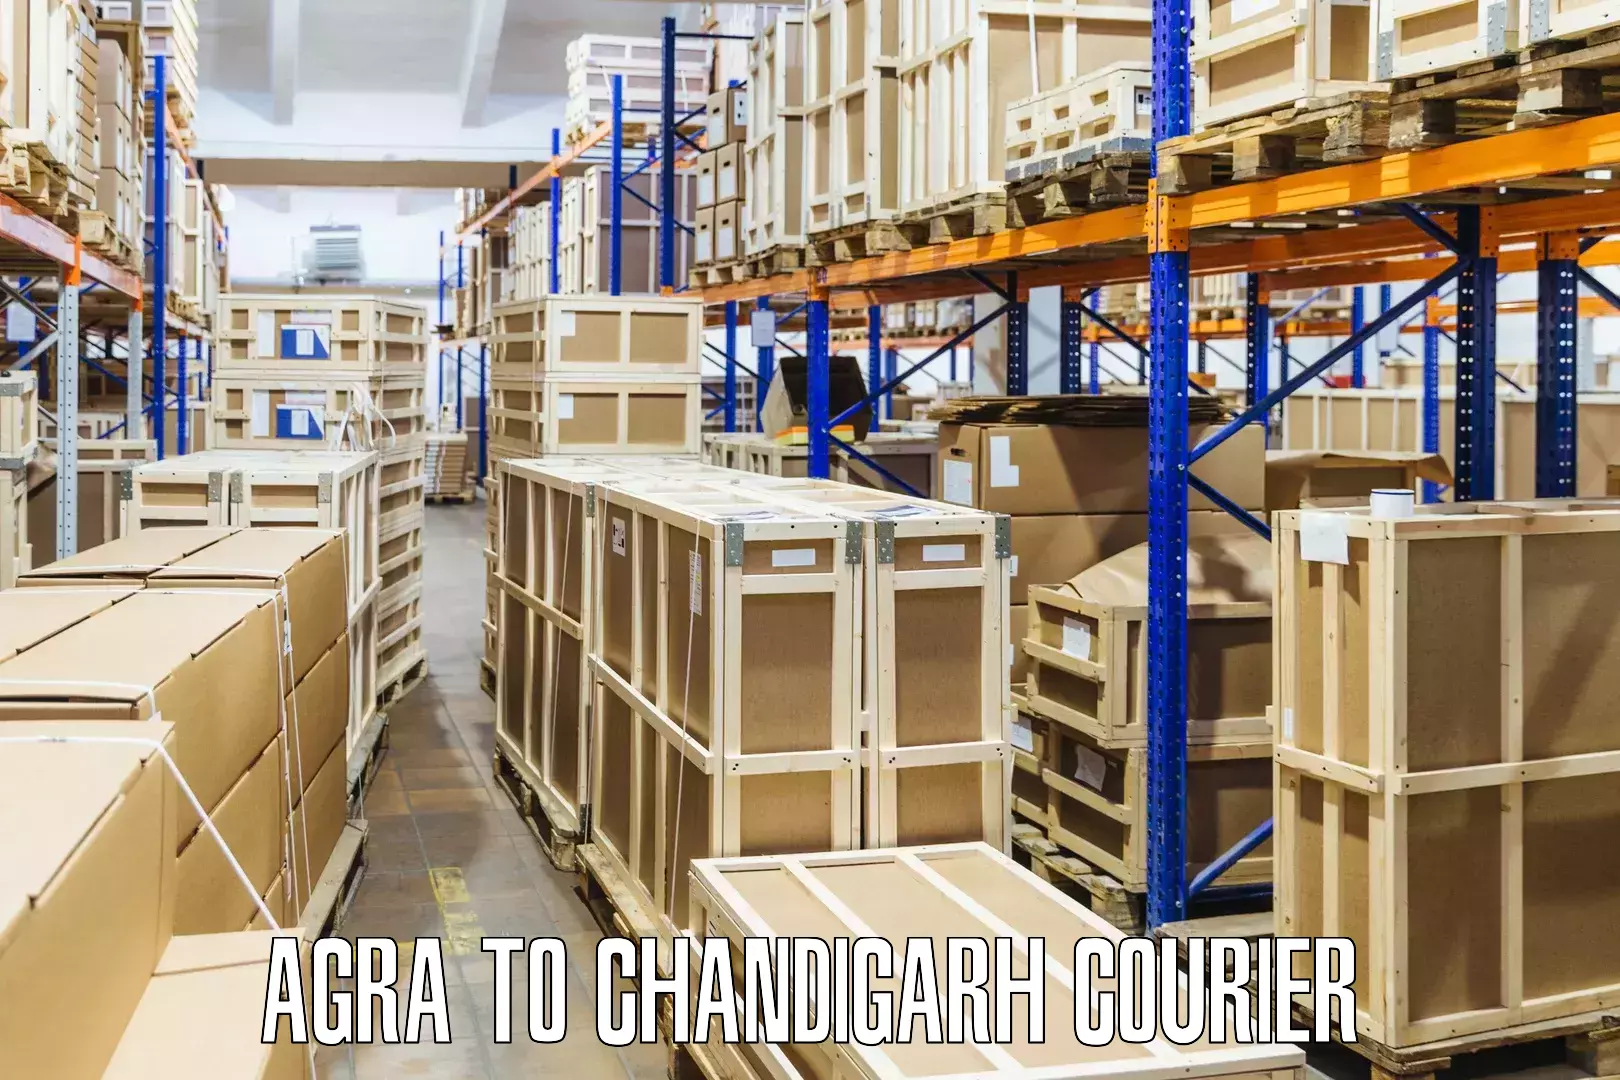 Courier rate comparison Agra to Chandigarh